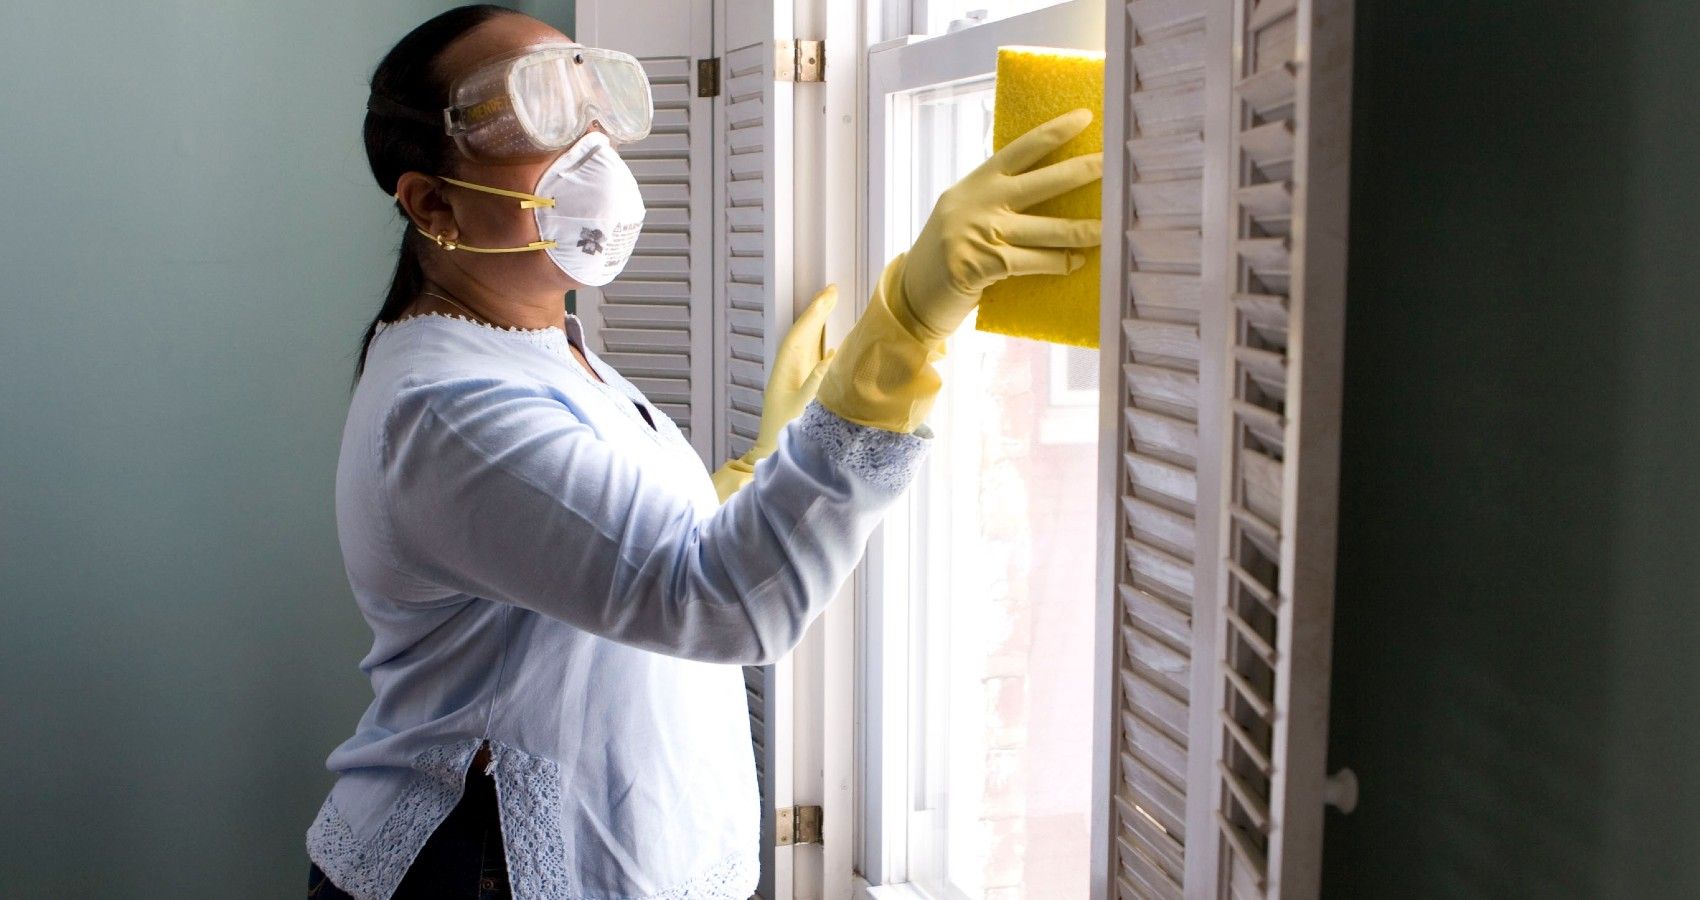 A pregnant woman cleaning a window with protective gear on